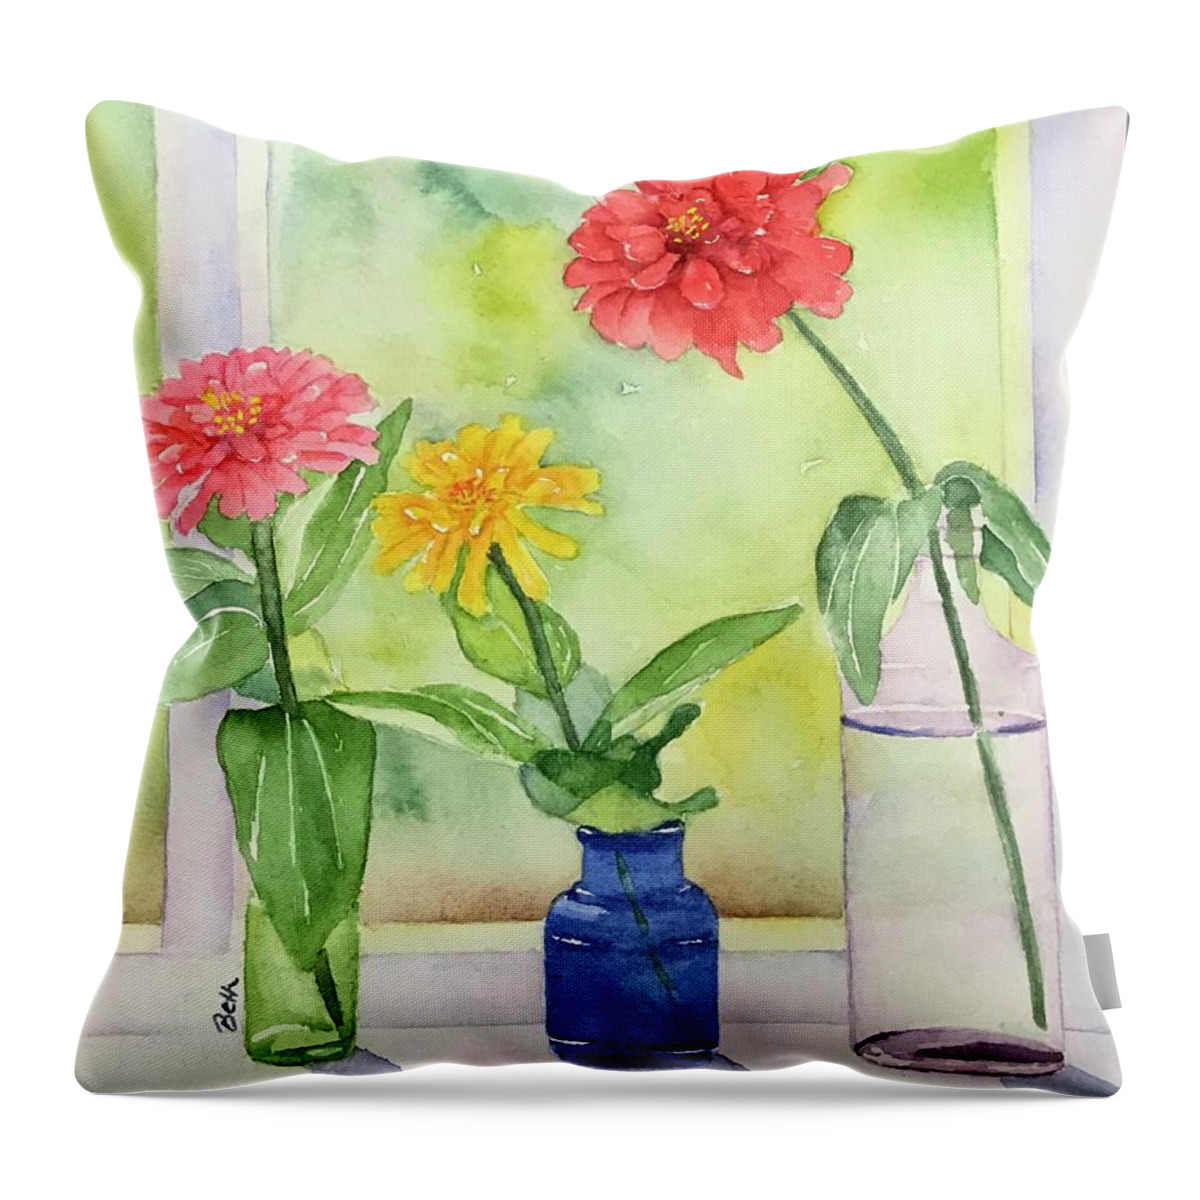 Zinnias Throw Pillow featuring the painting Summer Beauties by Beth Fontenot